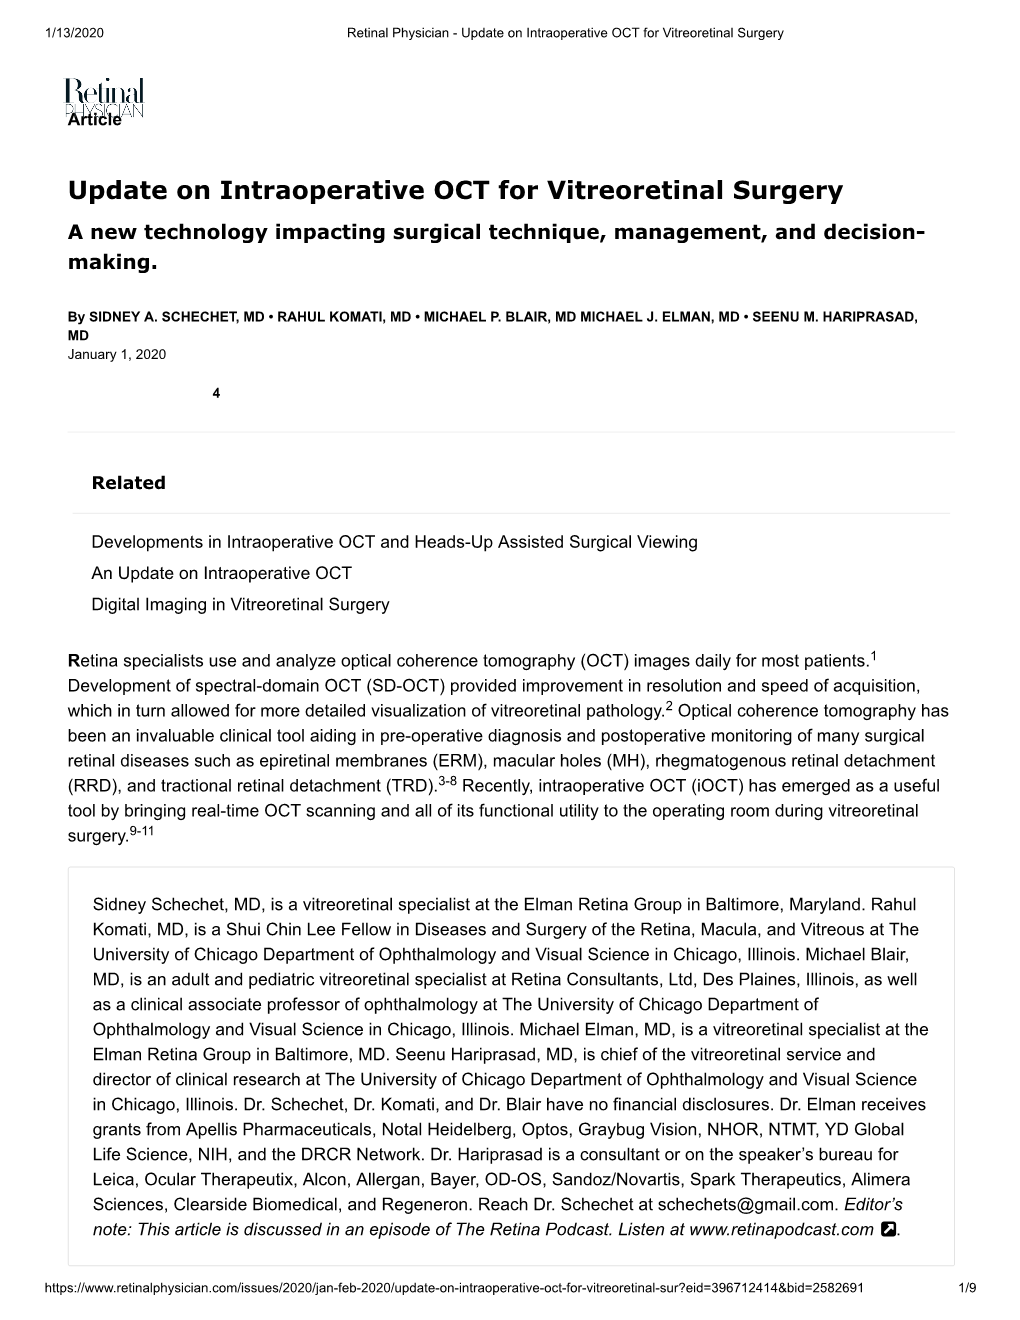 Intraoperative OCT for Vitreoretinal Surgery